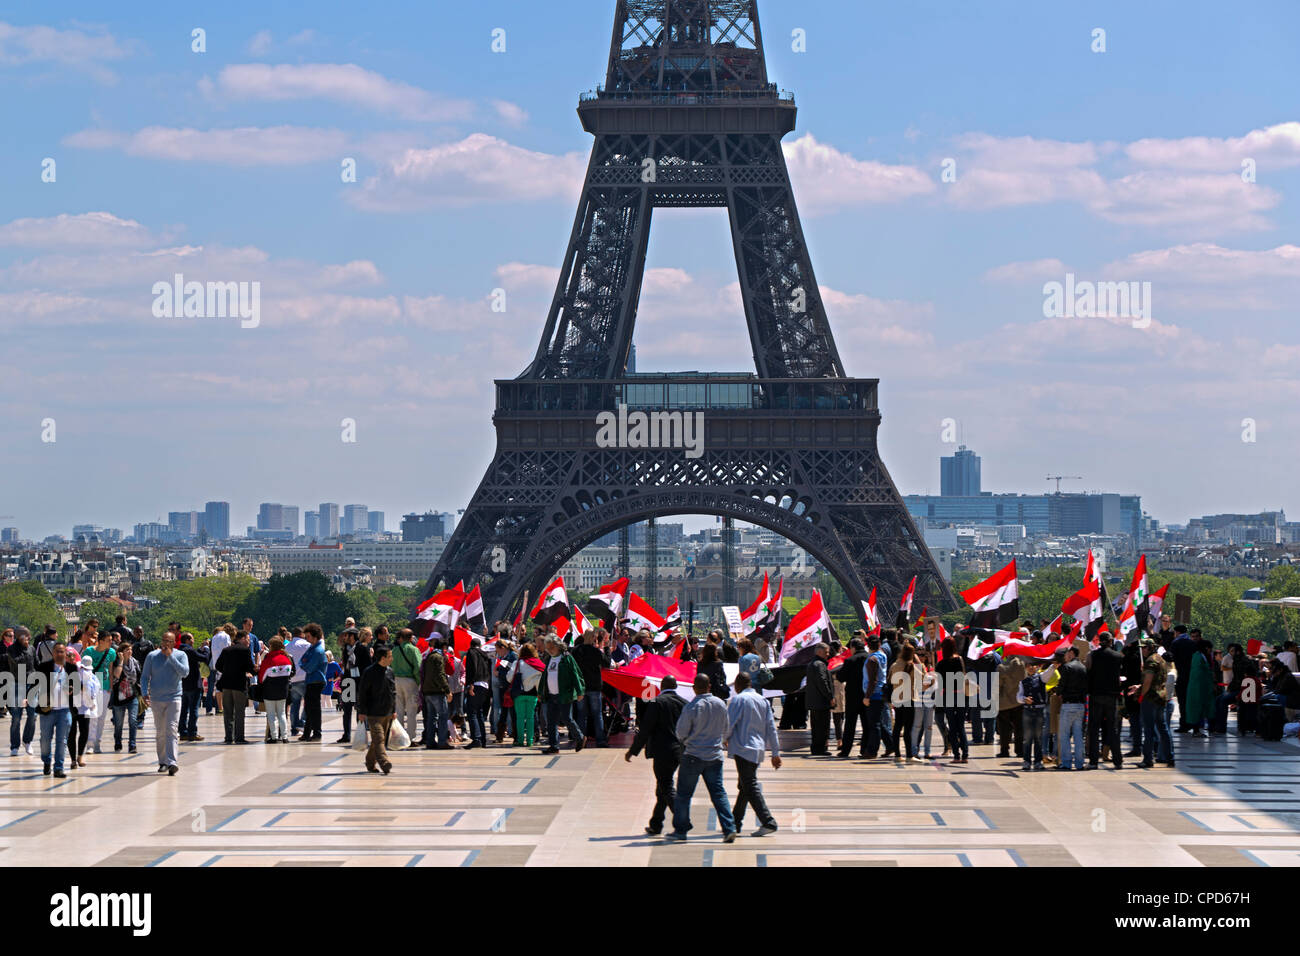 Supporters of Syrian President Assad demonstrate in front of the Eiffel Tower in Paris on May 13, 2012 Stock Photo